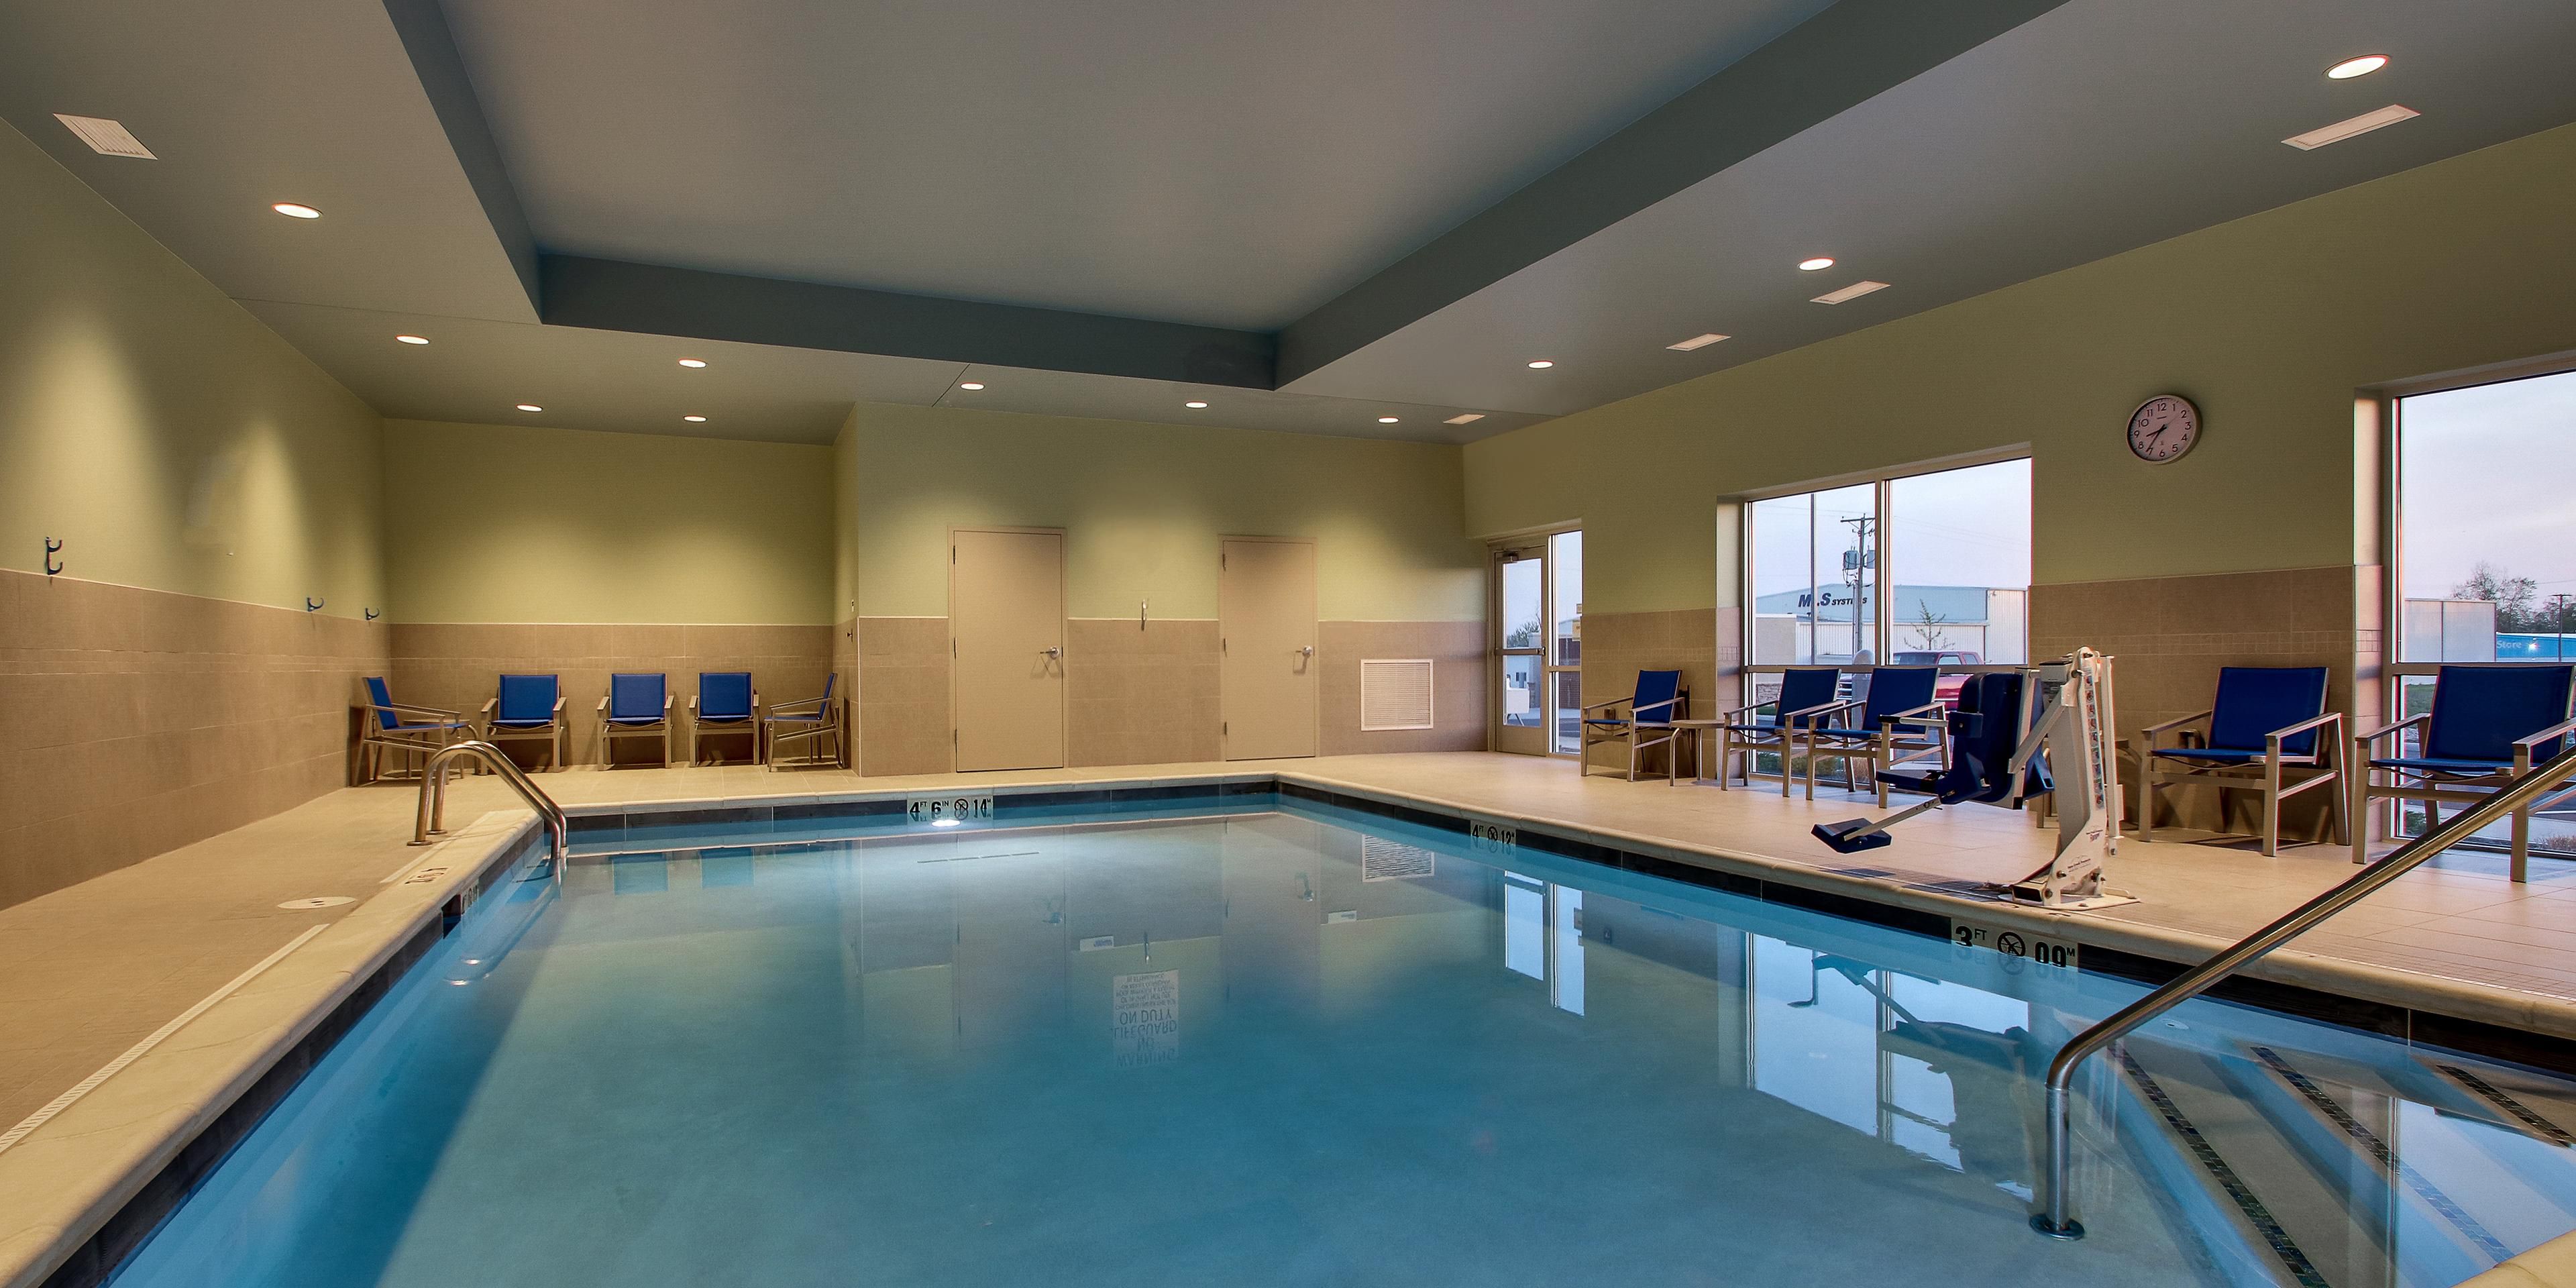 Take a dip in our indoor swimming pool, which is open for your enjoyment from 6am to 11pm daily. 